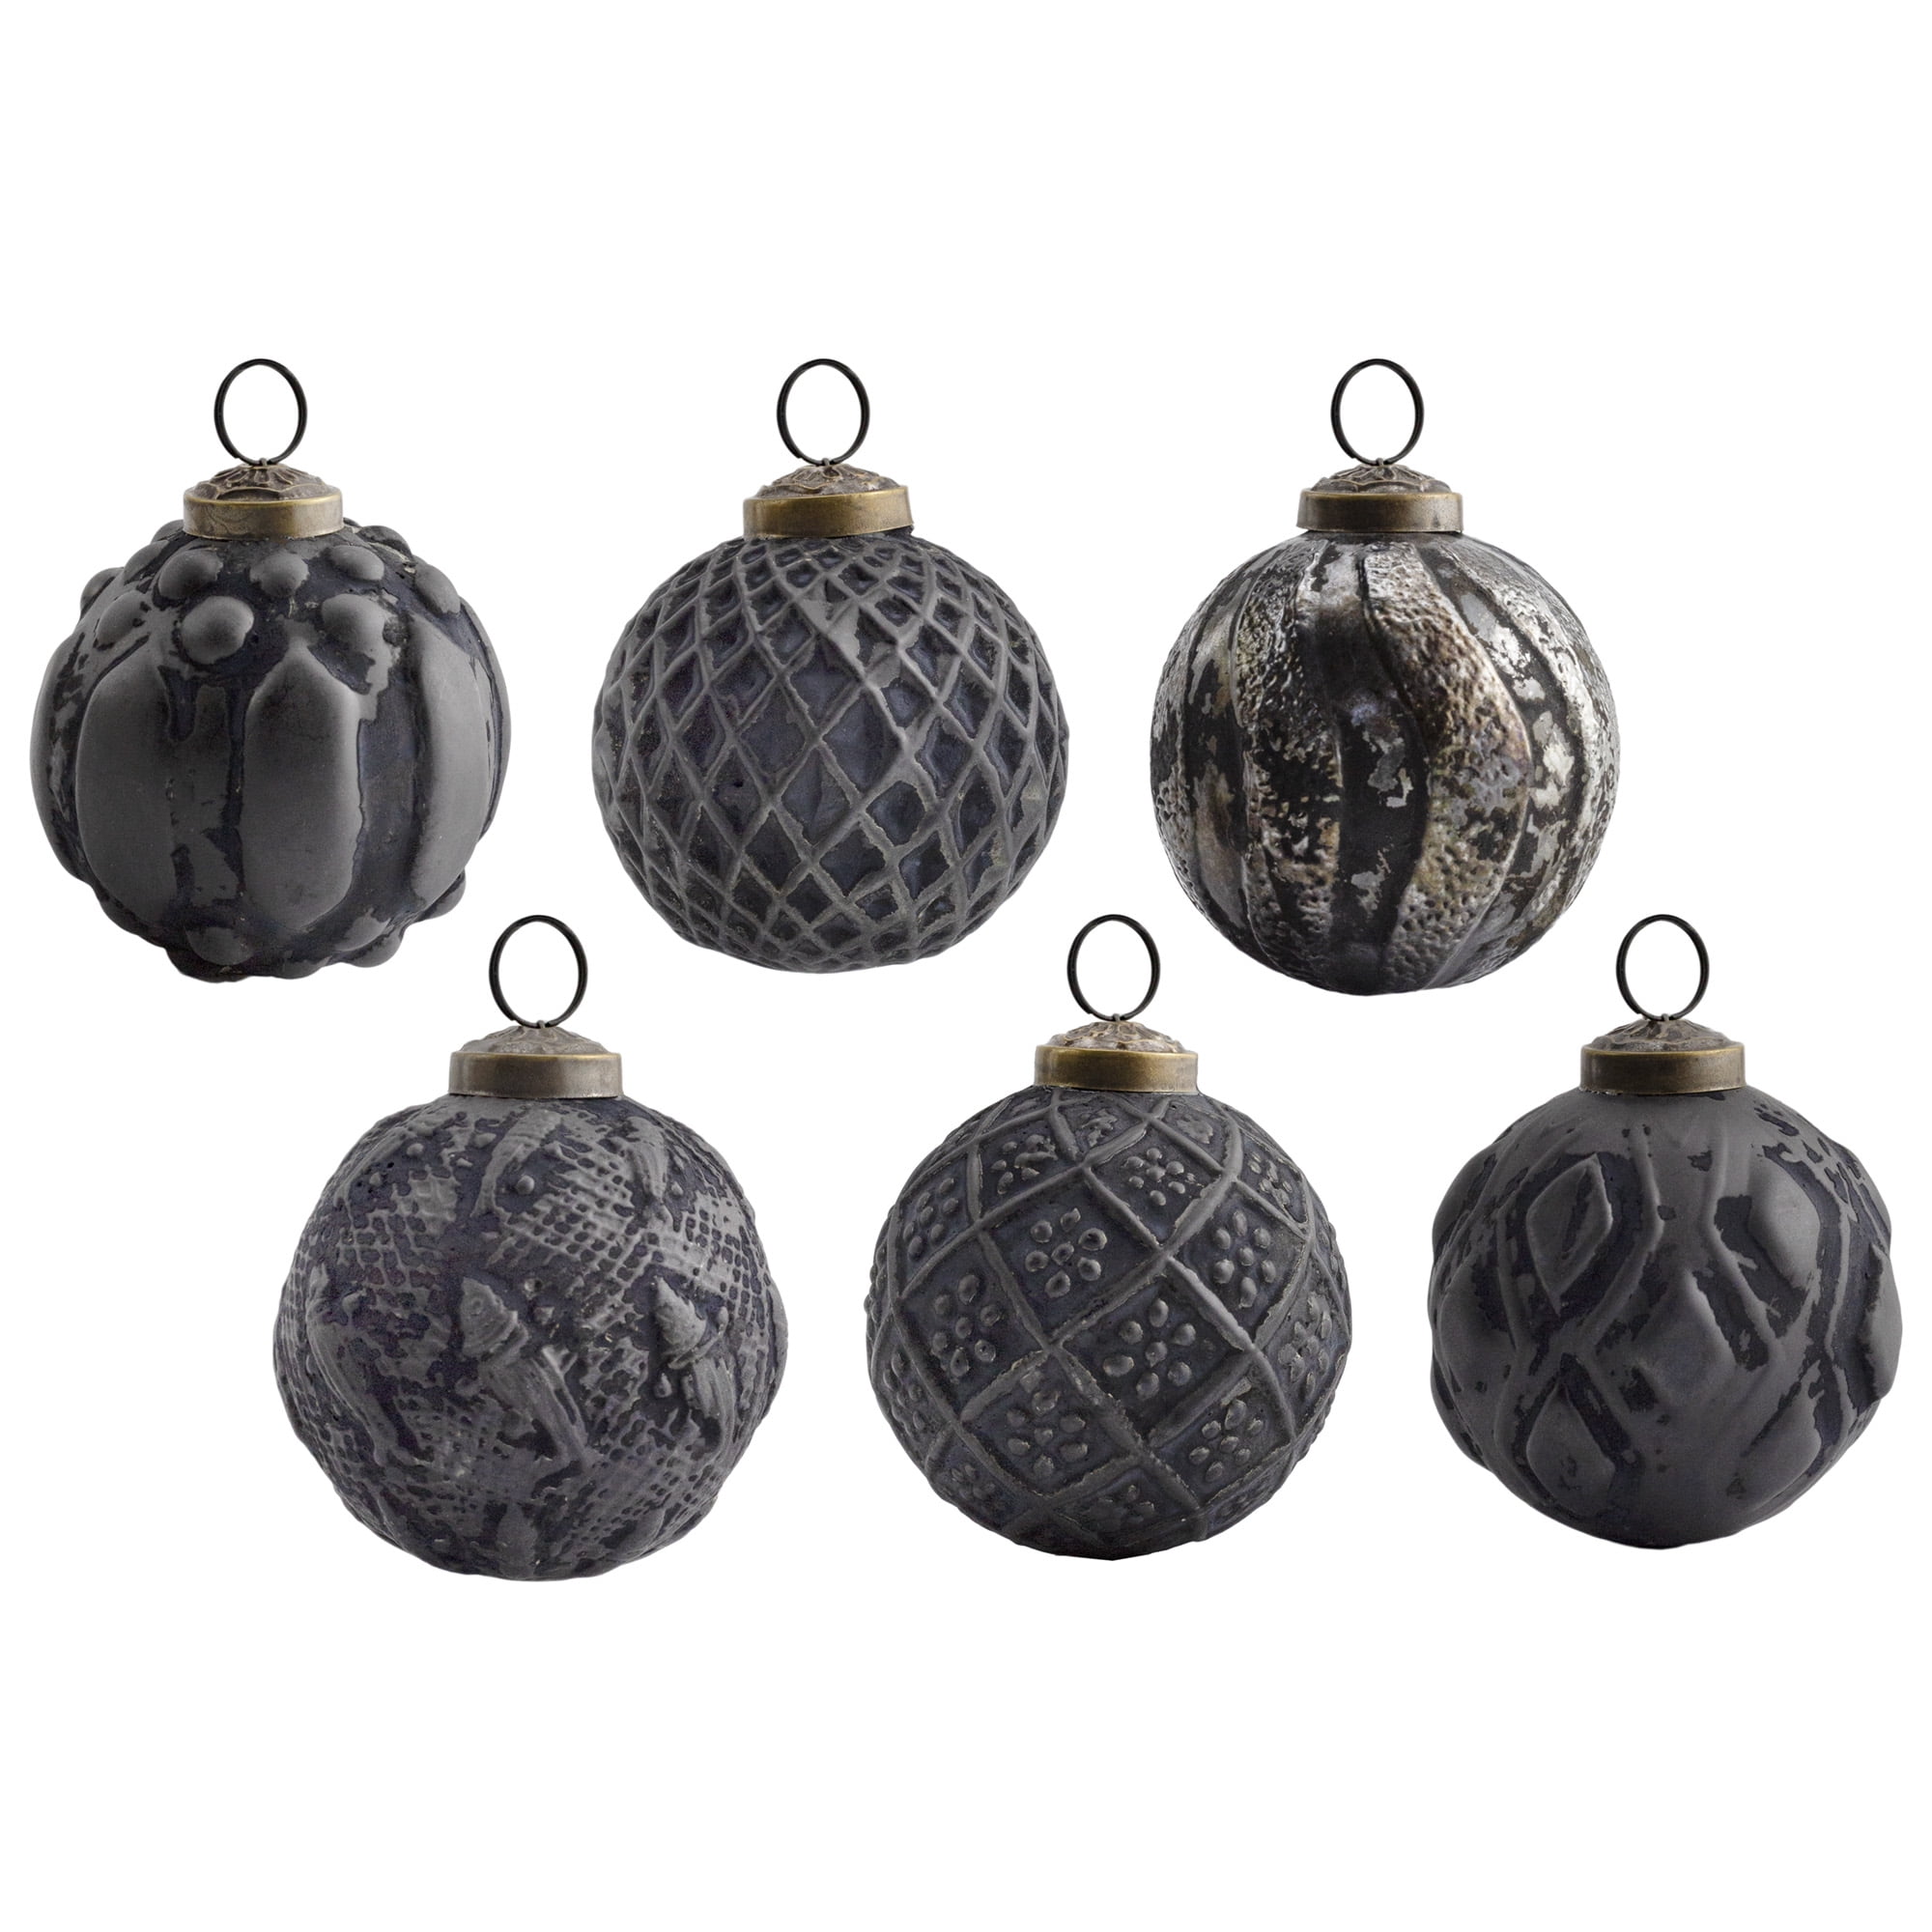 AuldHome Farmhouse Ball Ornaments (Set of 6, Charcoal Black); Distressed Metal Glass Ball Vintage Style Christmas Decorations